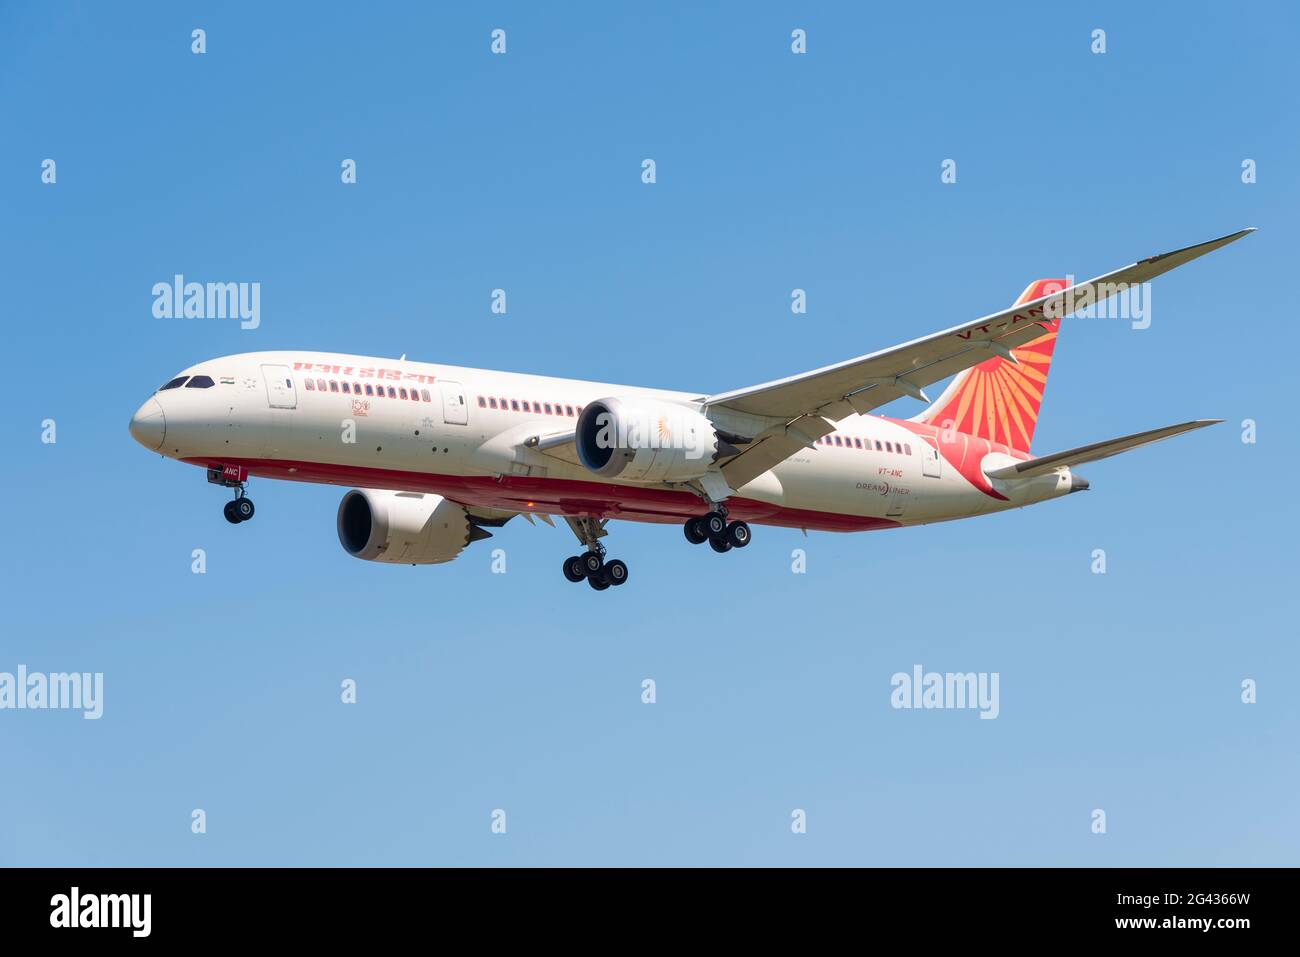 Air India Boeing 787 jet airliner plane VT-ANC landing at London Heathrow Airport, UK, in blue sky during COVID 19 pandemic easing of lockdown Stock Photo